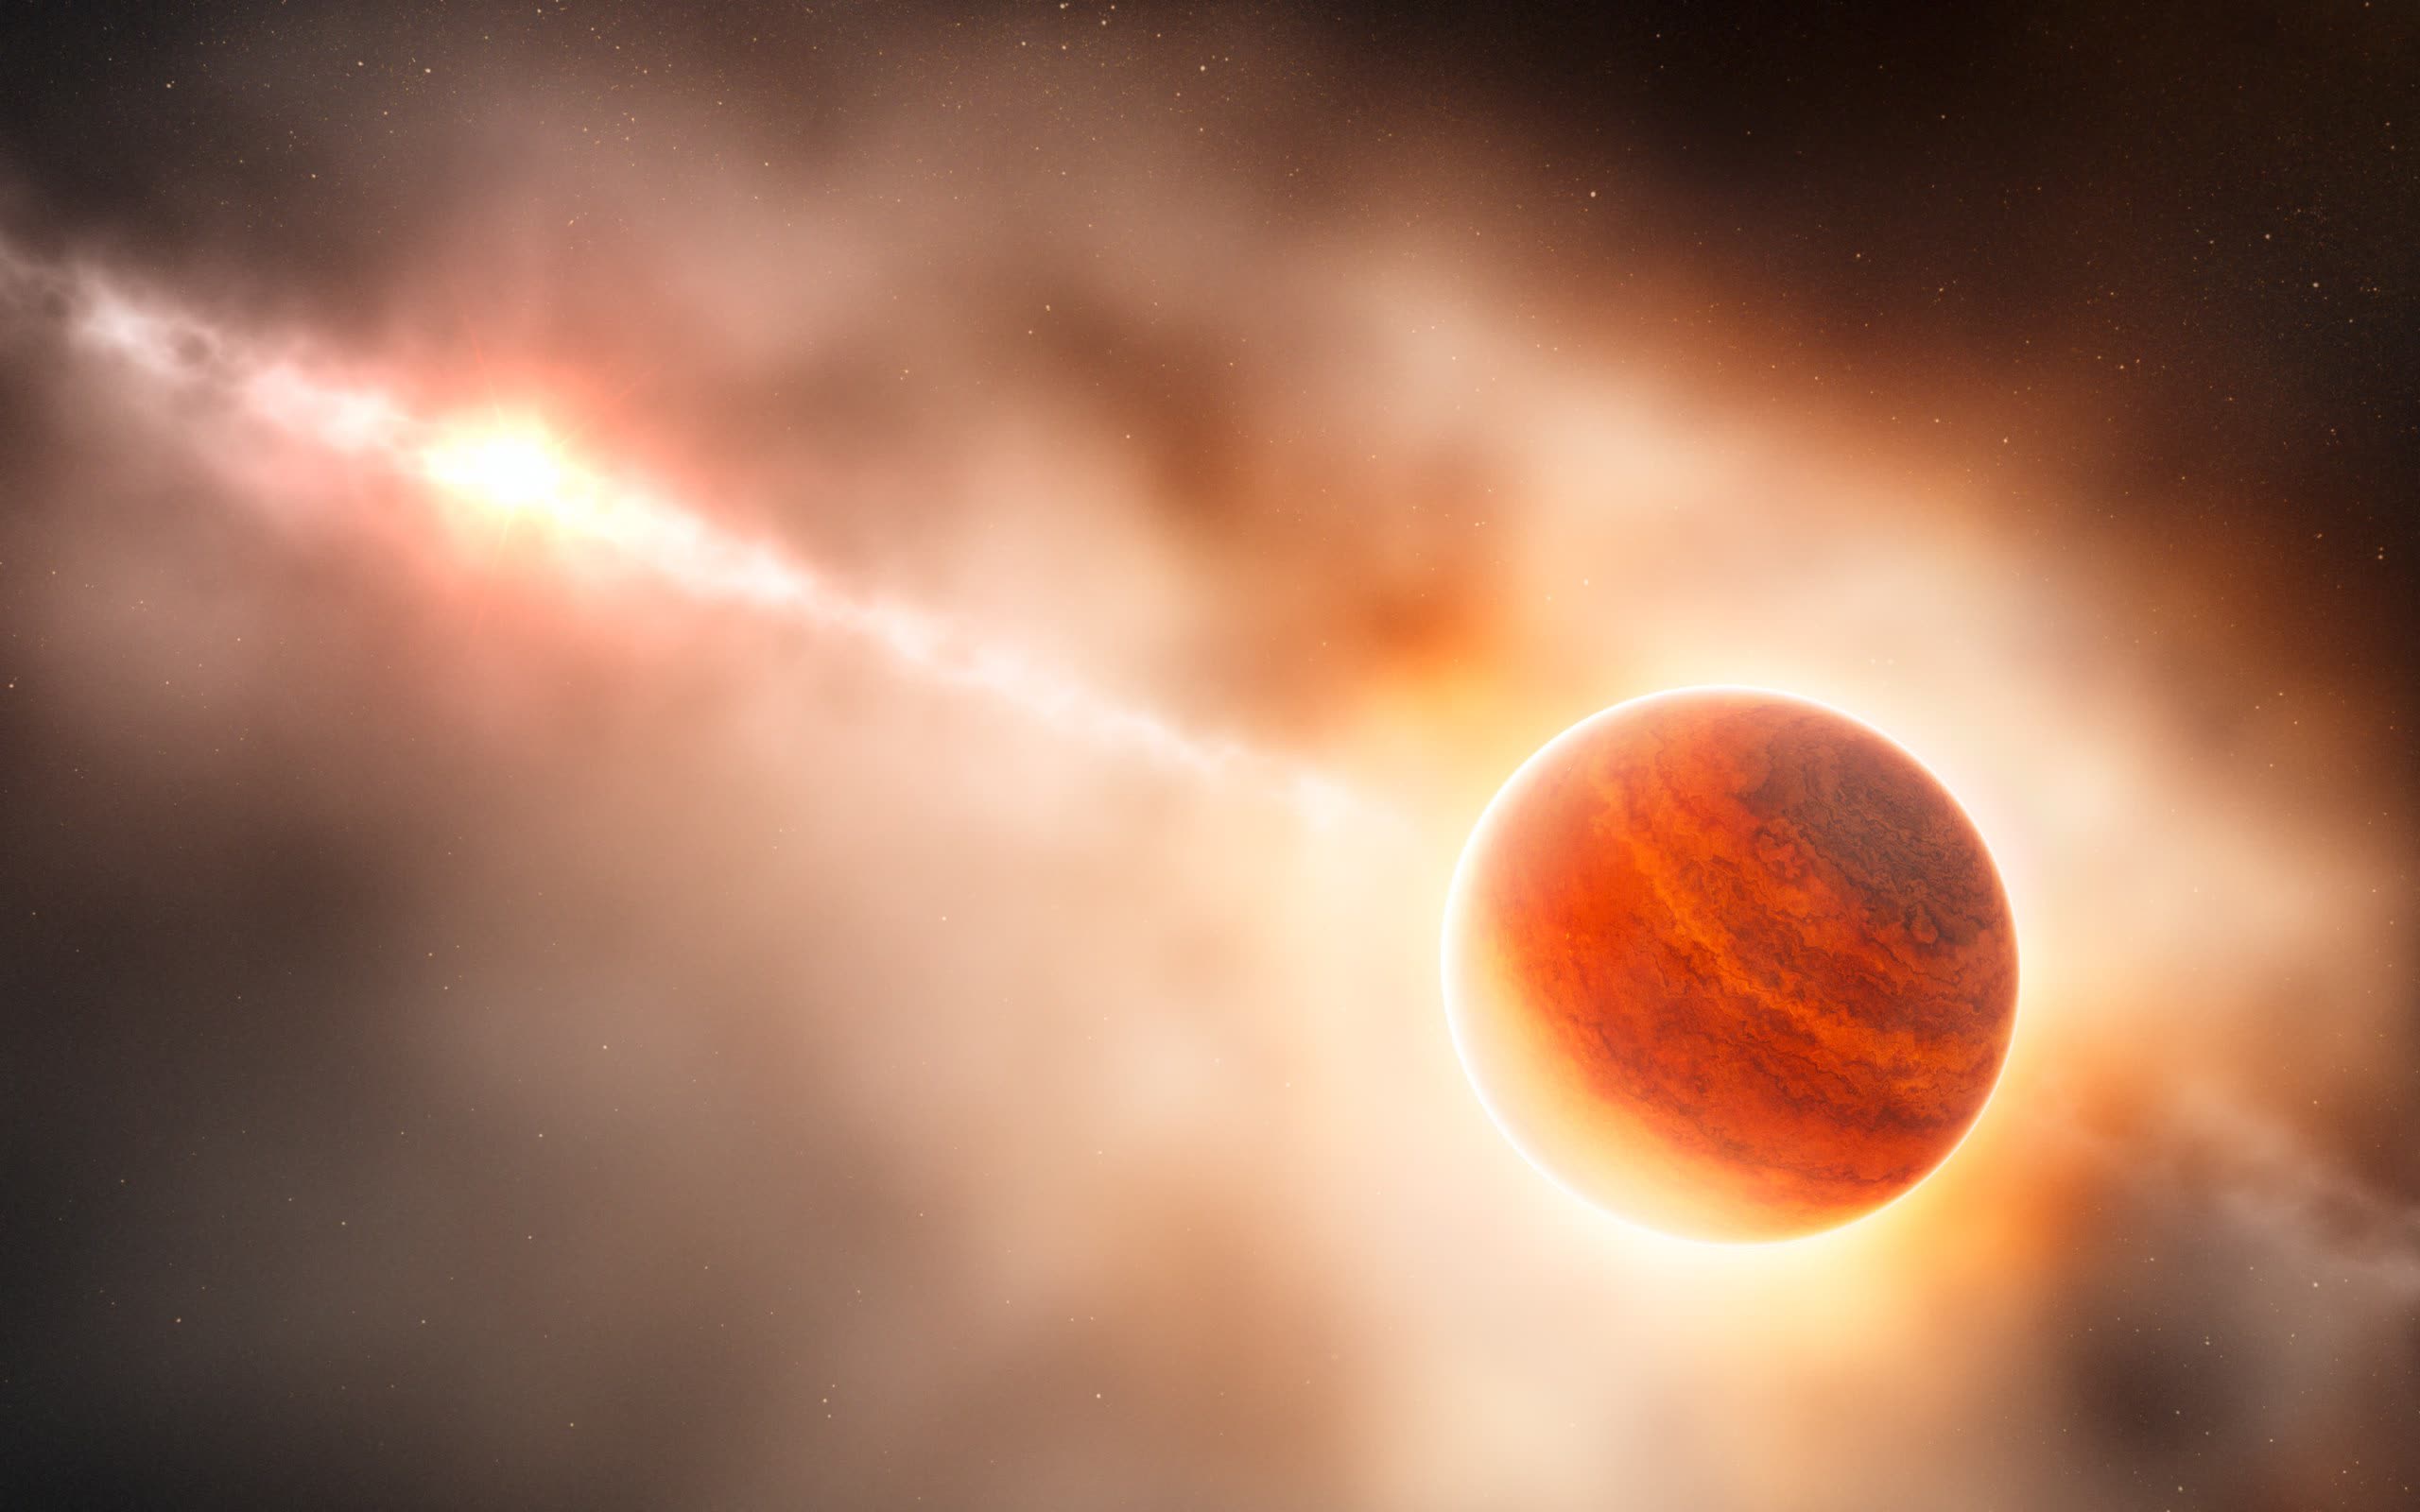 Astronomers confirm third-ever sighted protoplanet